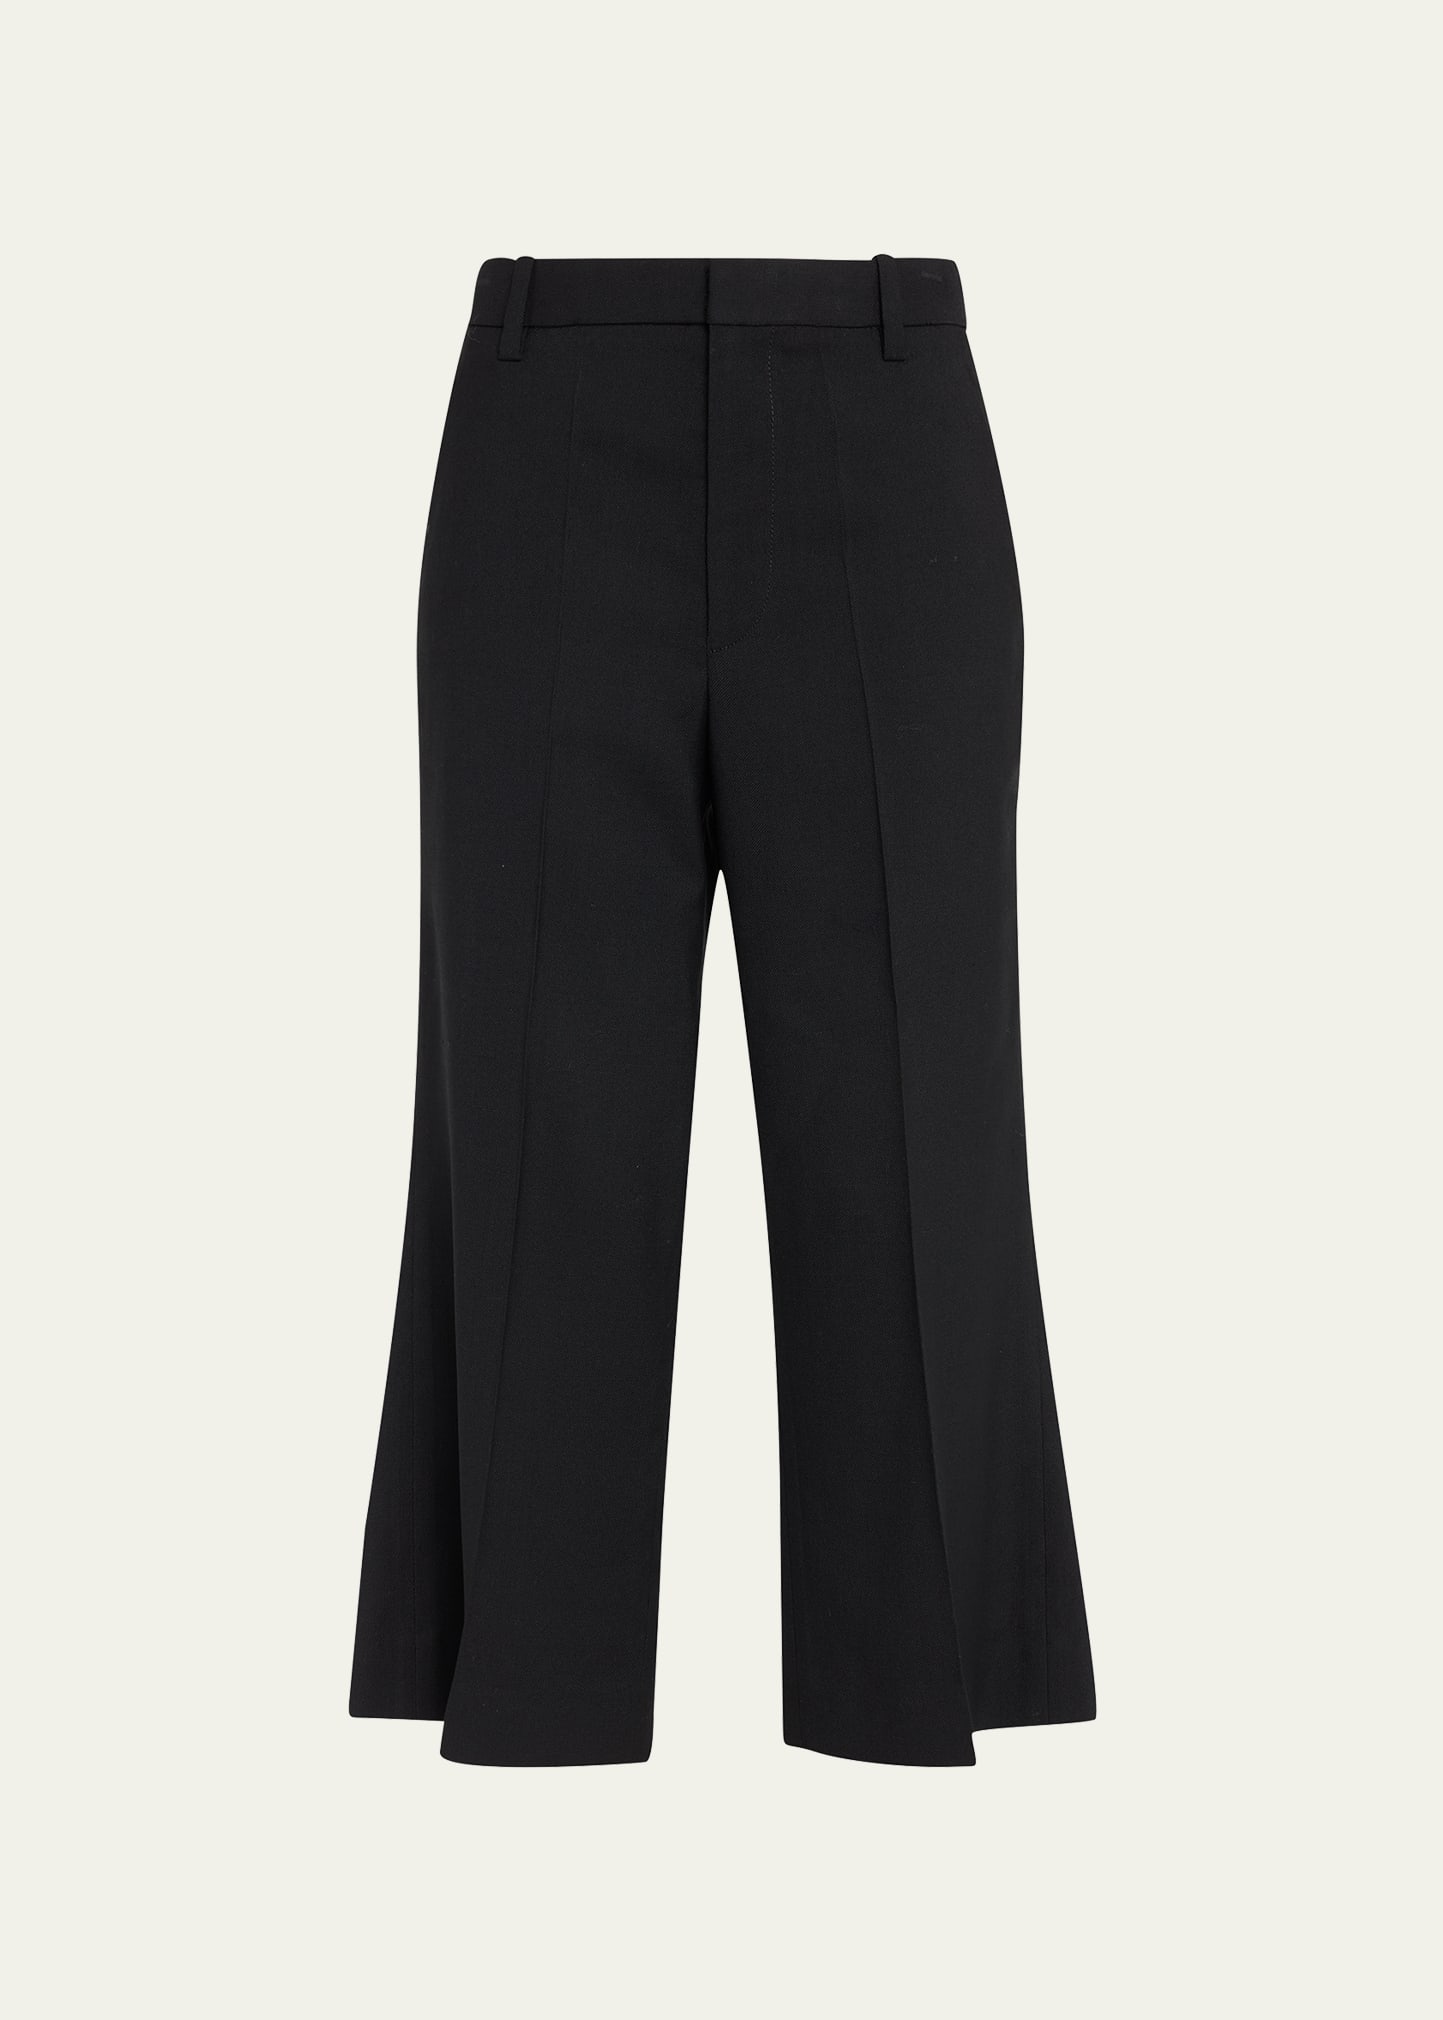 Marc Jacobs Abstract-Stitch Cropped Flare Trouser Pants